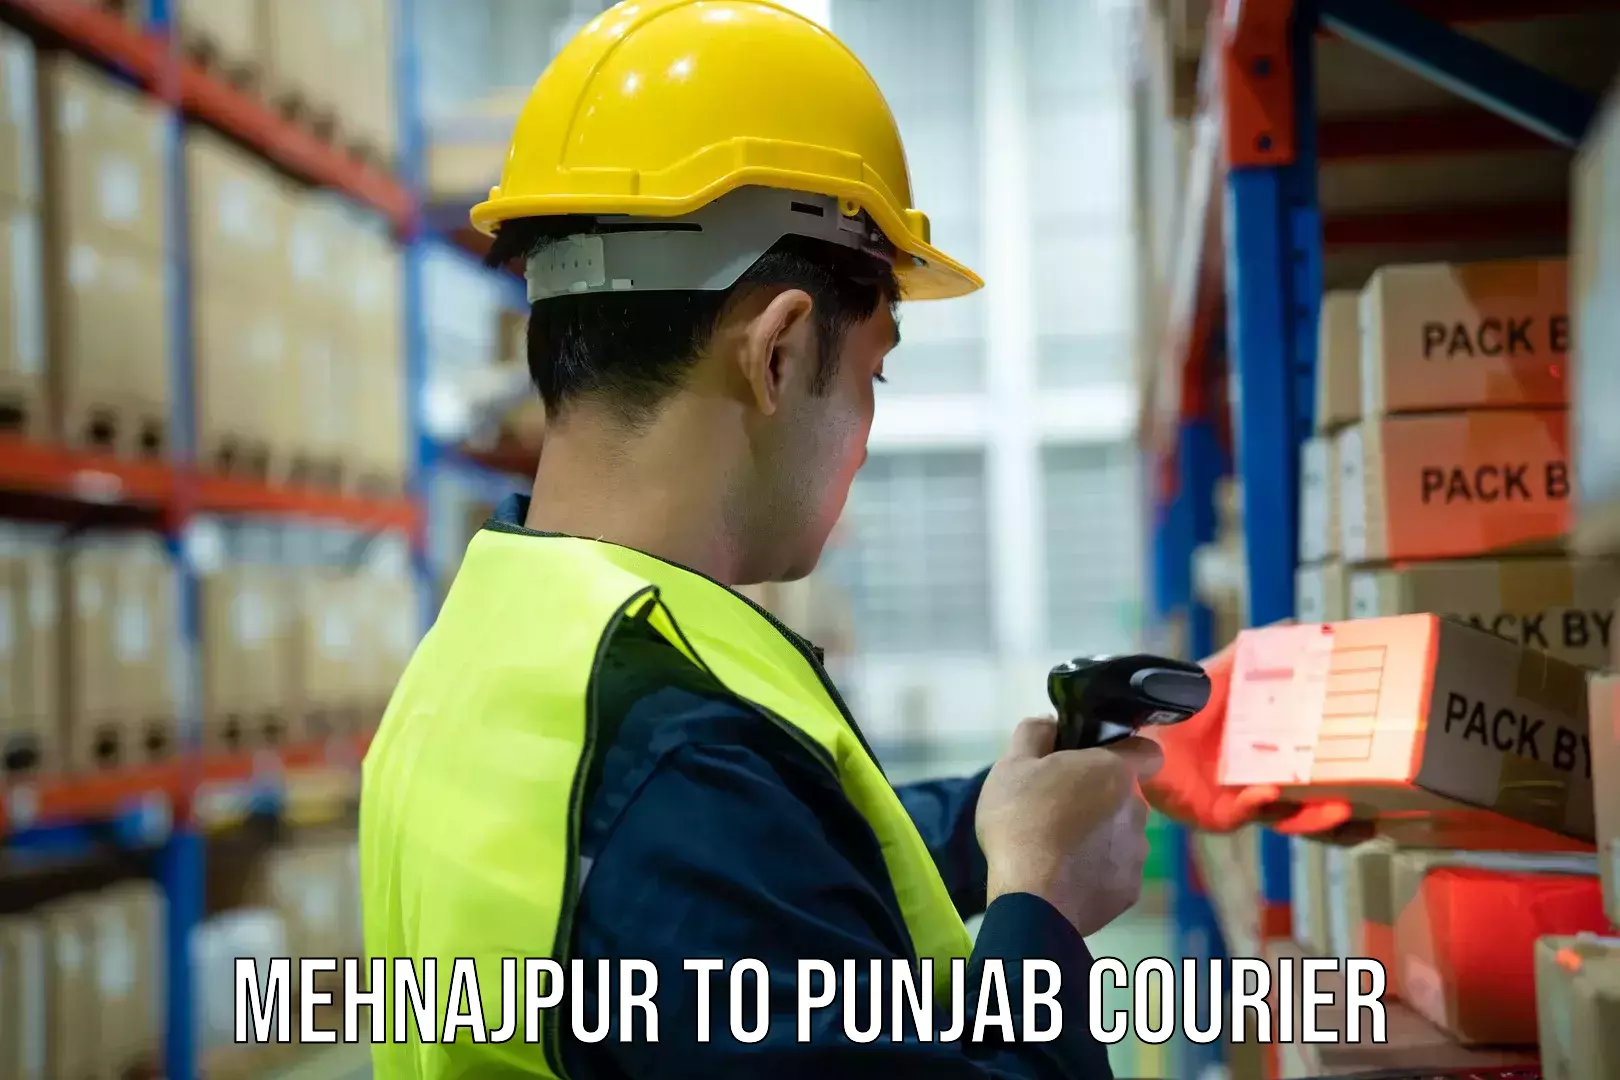 24/7 shipping services Mehnajpur to Punjab